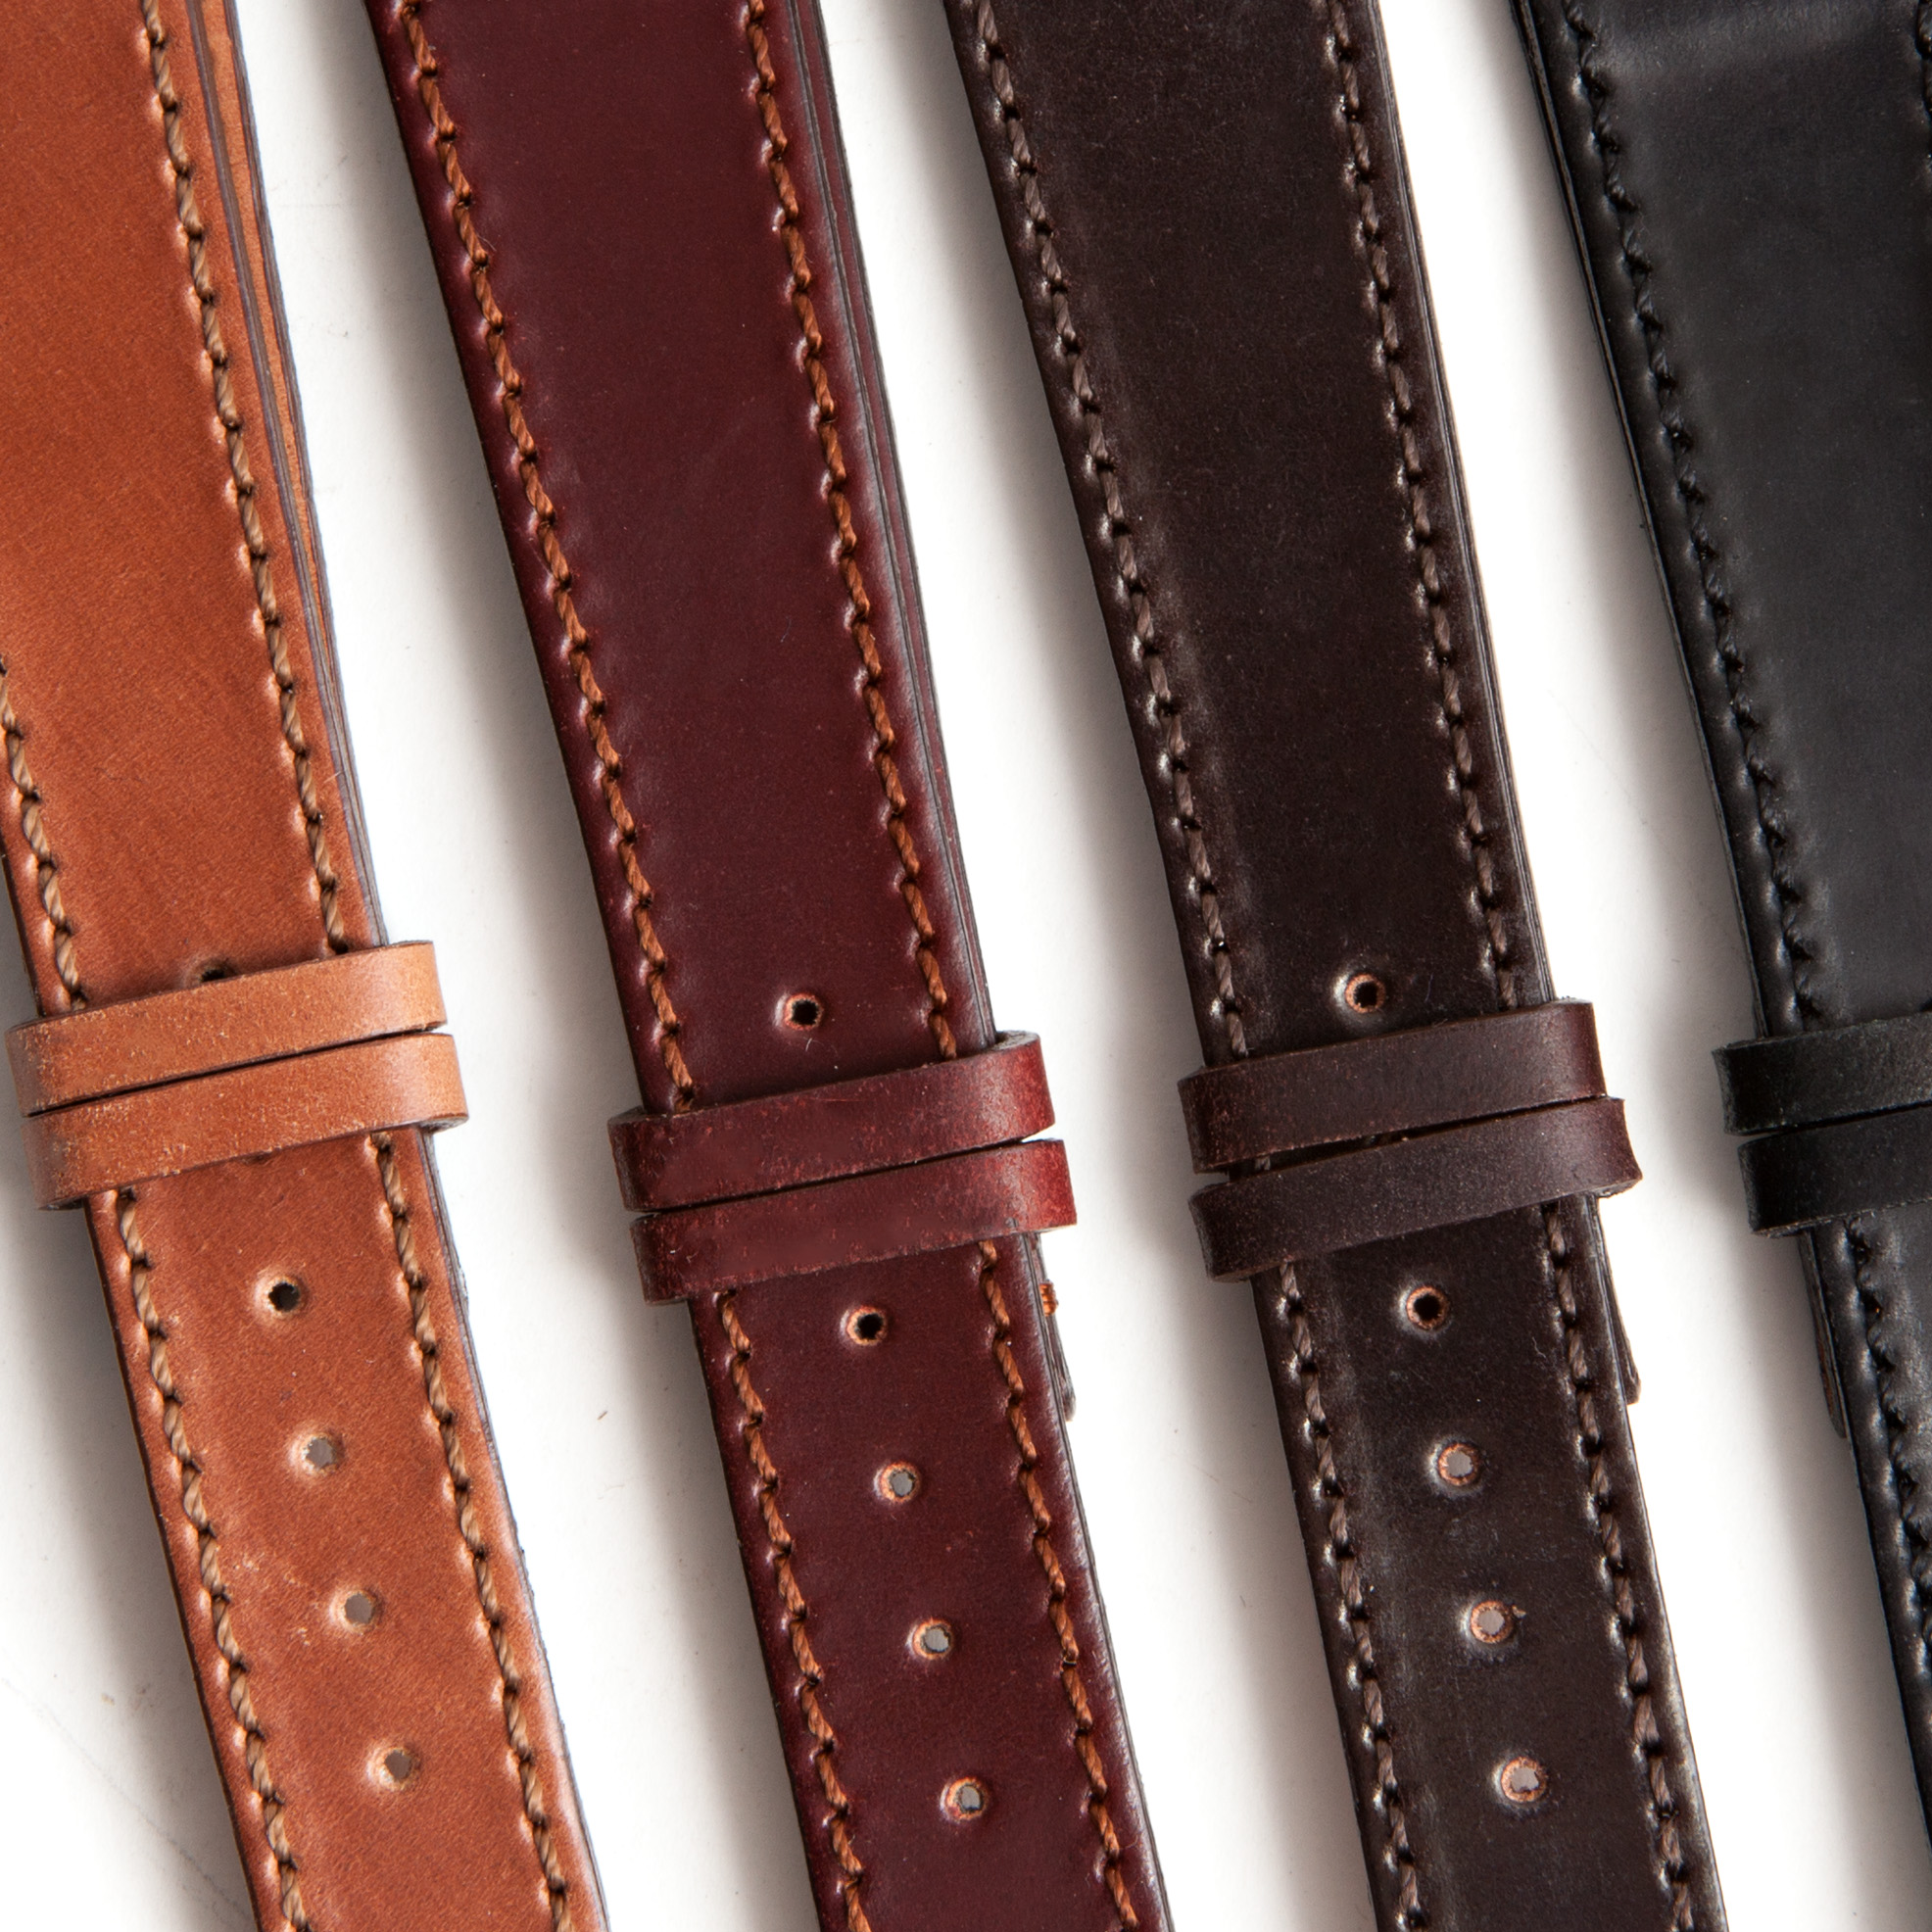 Shell Cordovan Watch Strap, Custom Made In USA